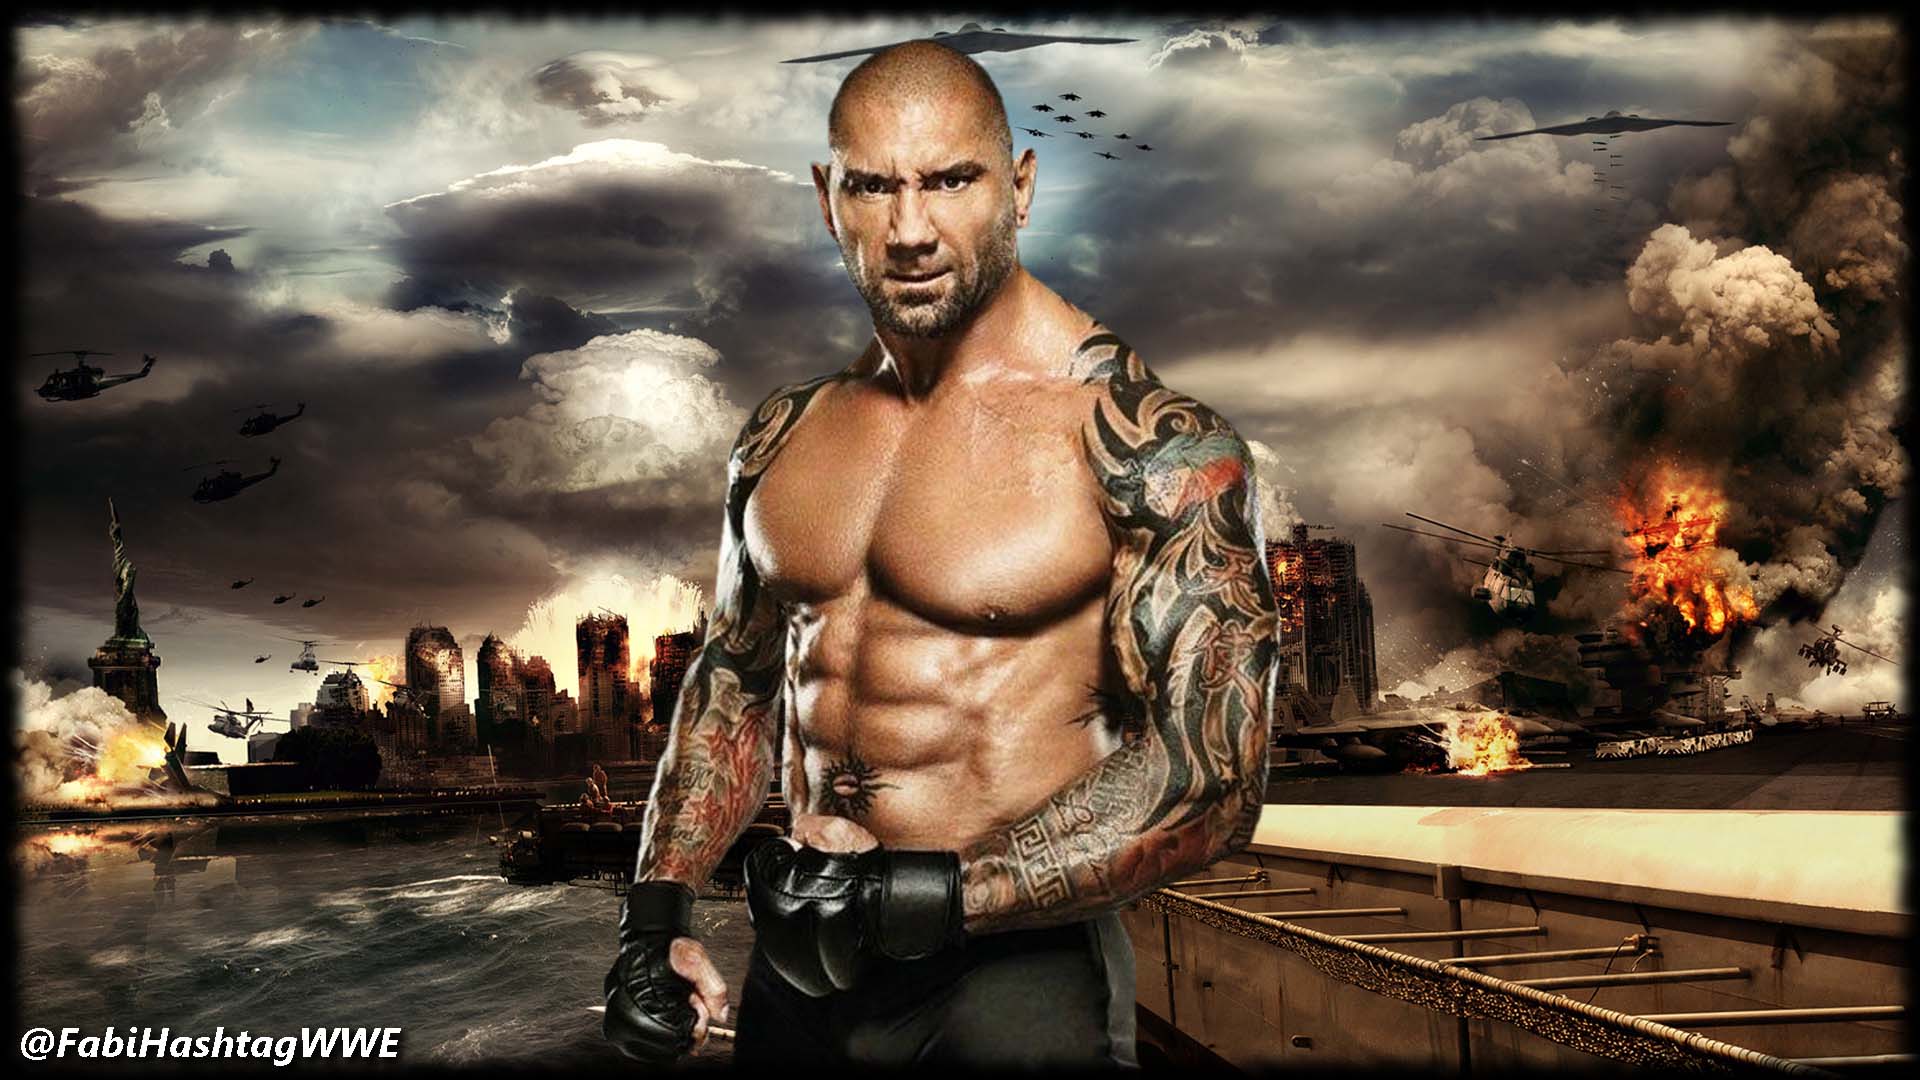 Wwe Dave Batista Wallpaper Daily Background In HD